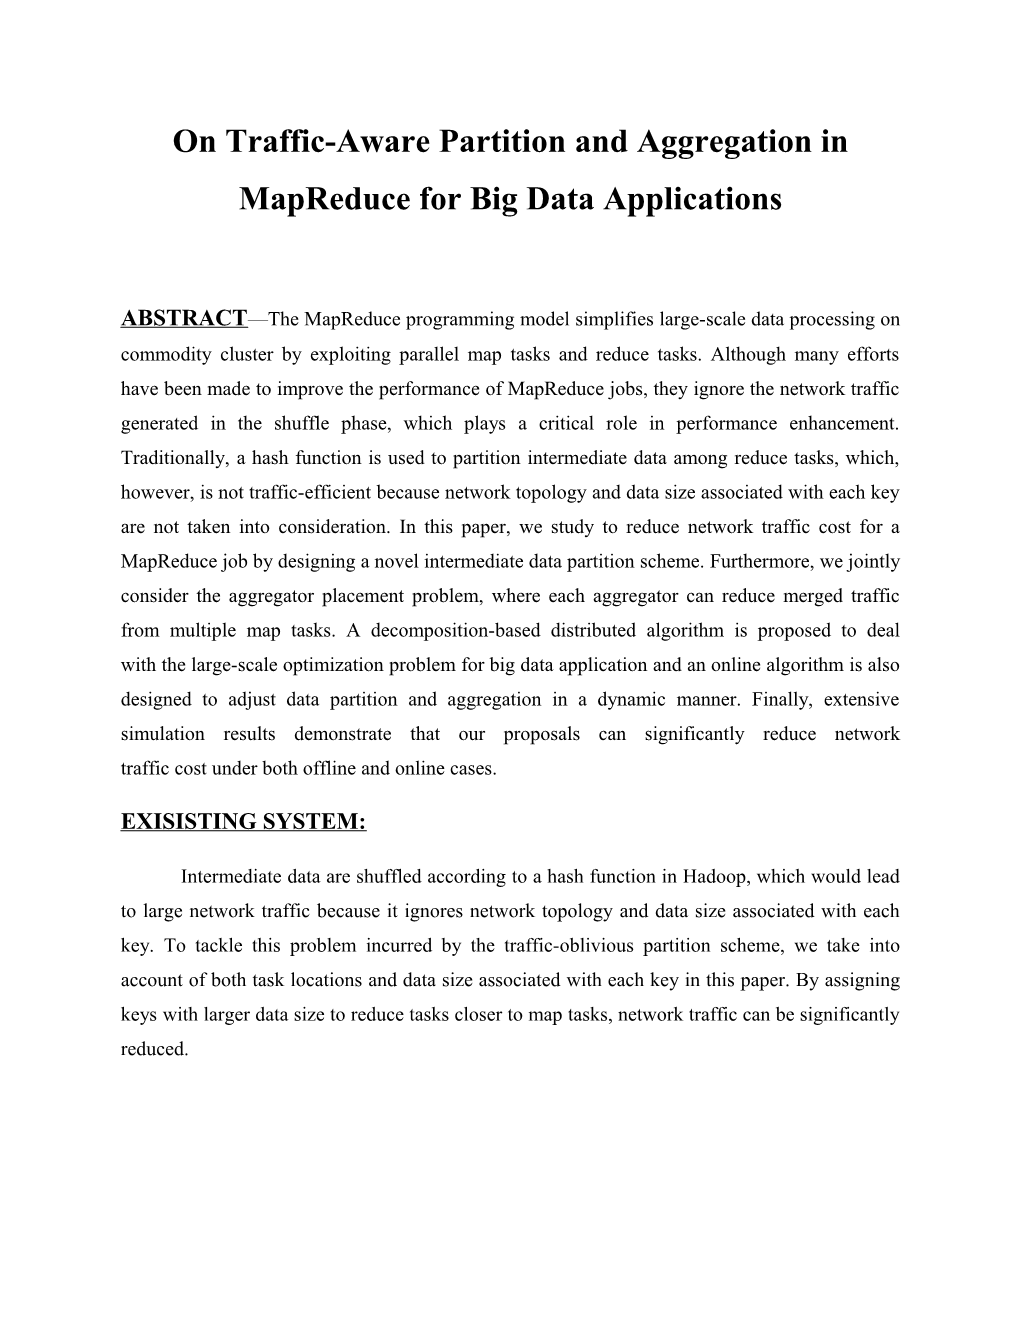 On Traffic-Aware Partition and Aggregation Inmapreduce for Big Data Applications